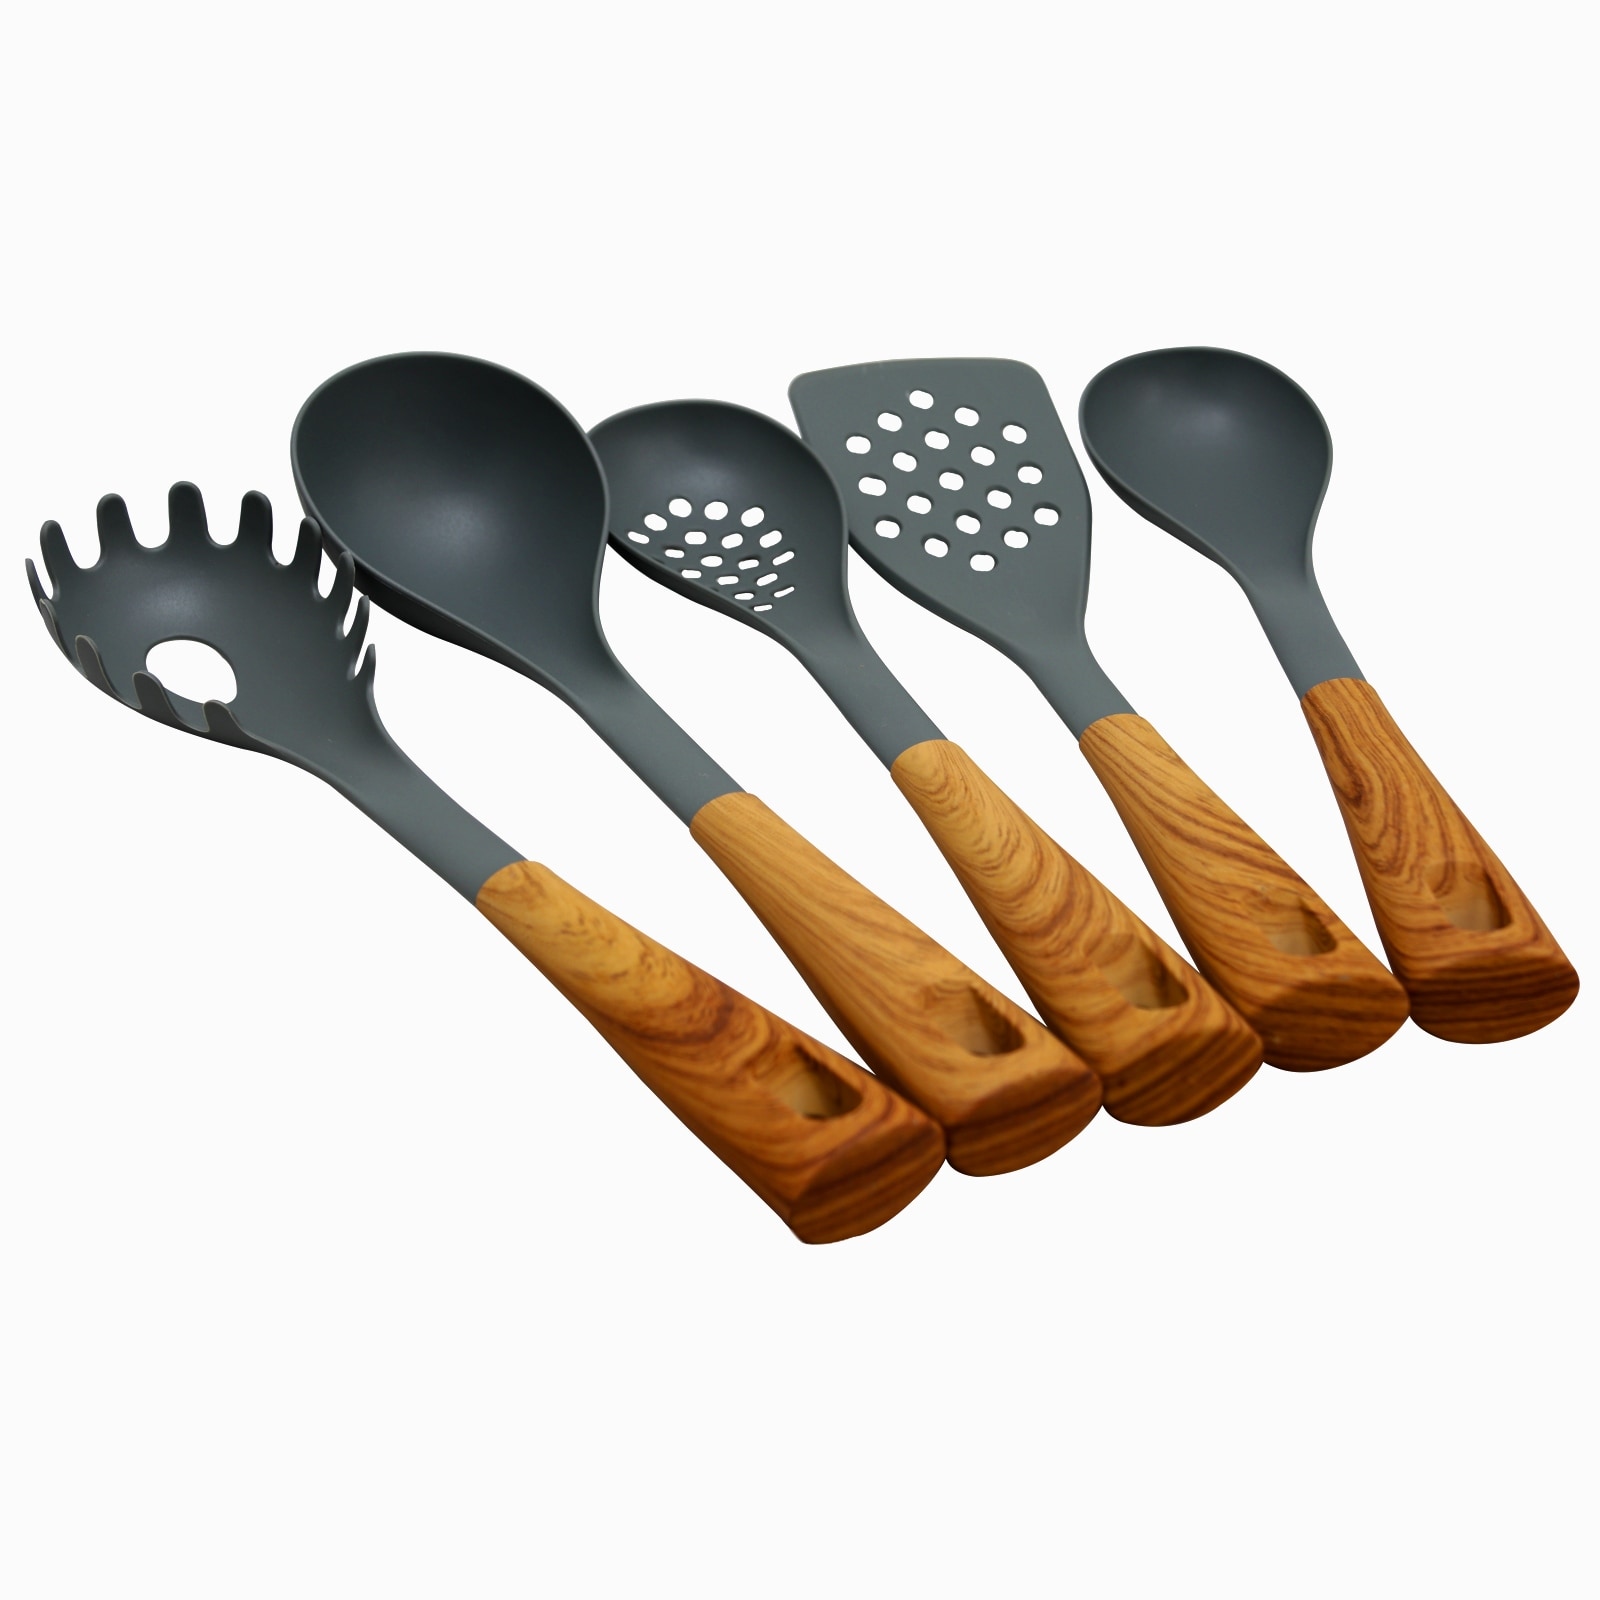 https://ak1.ostkcdn.com/images/products/is/images/direct/6f3e7c2f383965da2baeba996349306988827f91/Oster-Everwood-Kitchen-Nylon-Tools-Set-with-Wood-Inspired-Handles%2C-Set-of-5.jpg